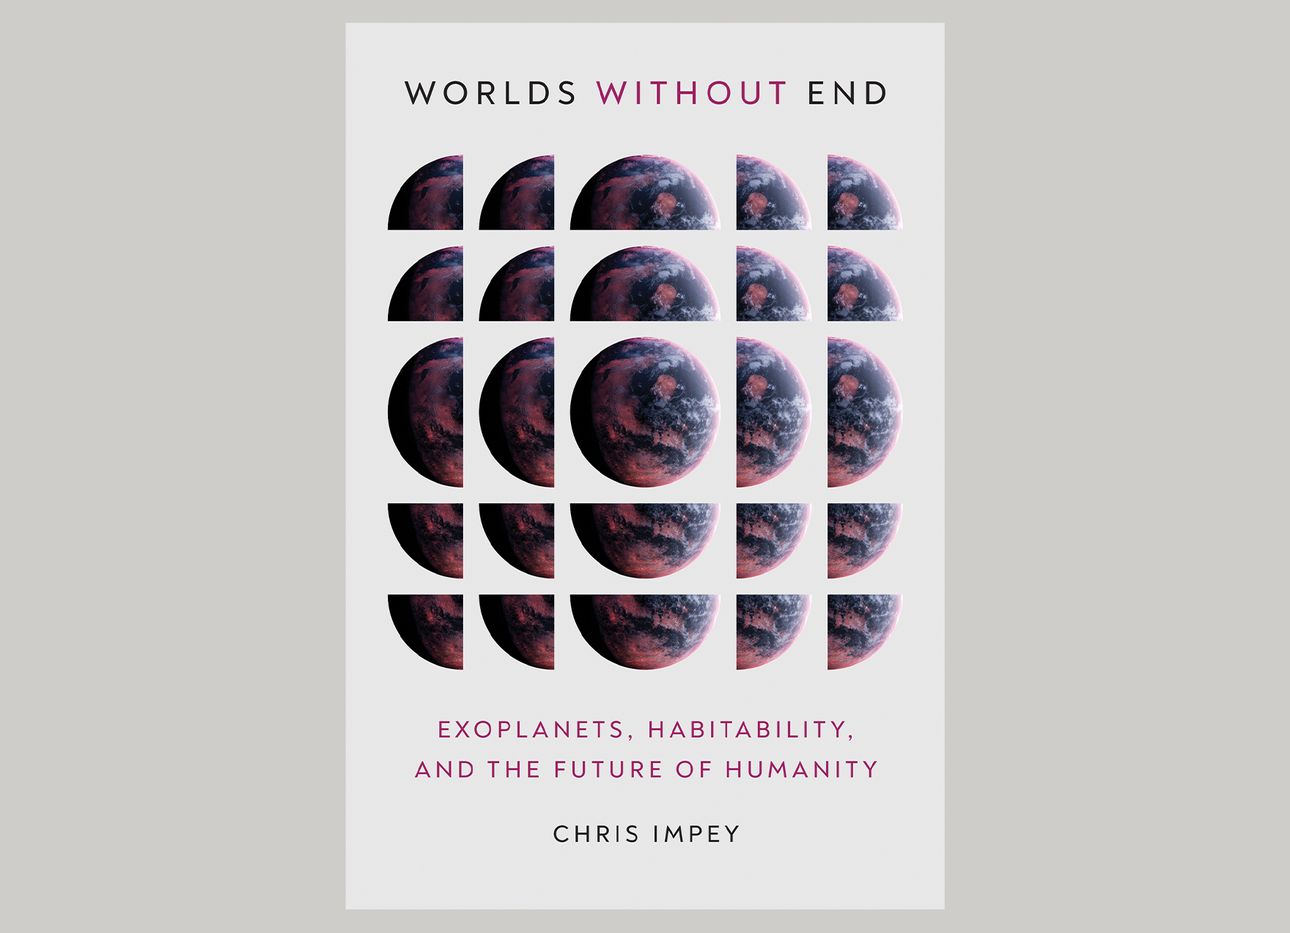 Cover of “Worlds Without End” (2023) by Chris Impey. (Courtesy MIT Press)